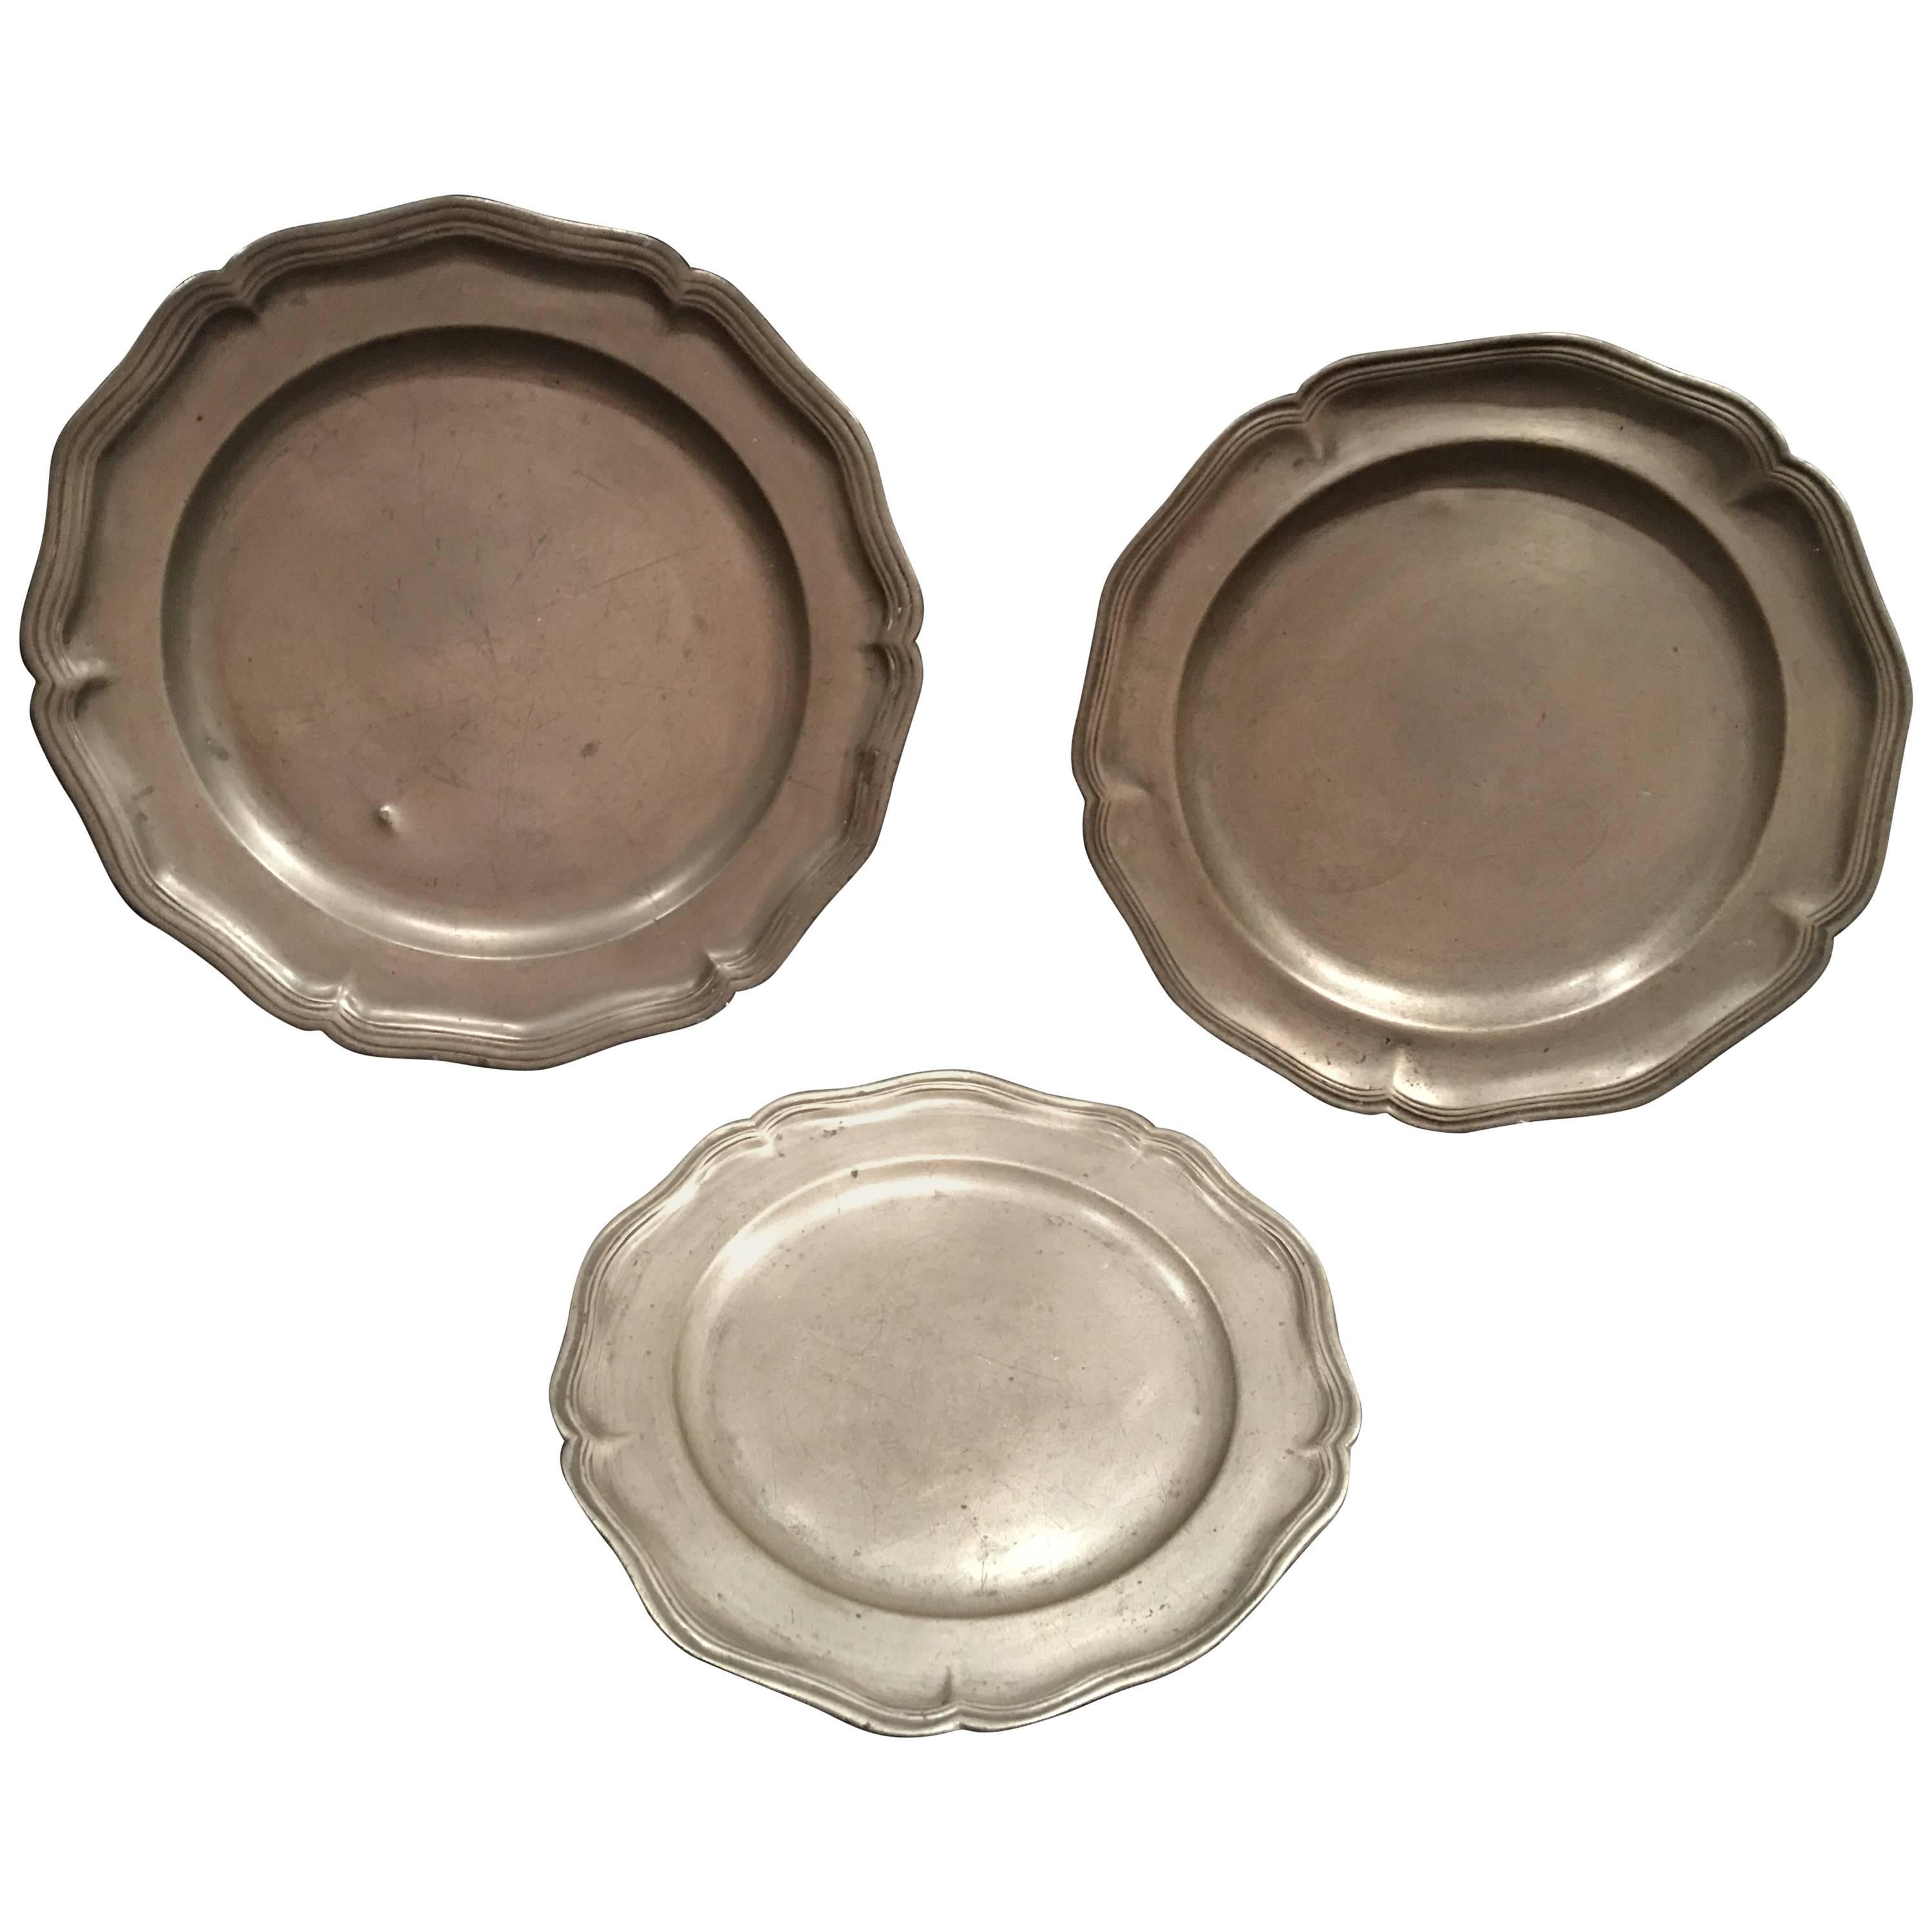 Set of Three English Pewter Plates or Platters, 19th Century